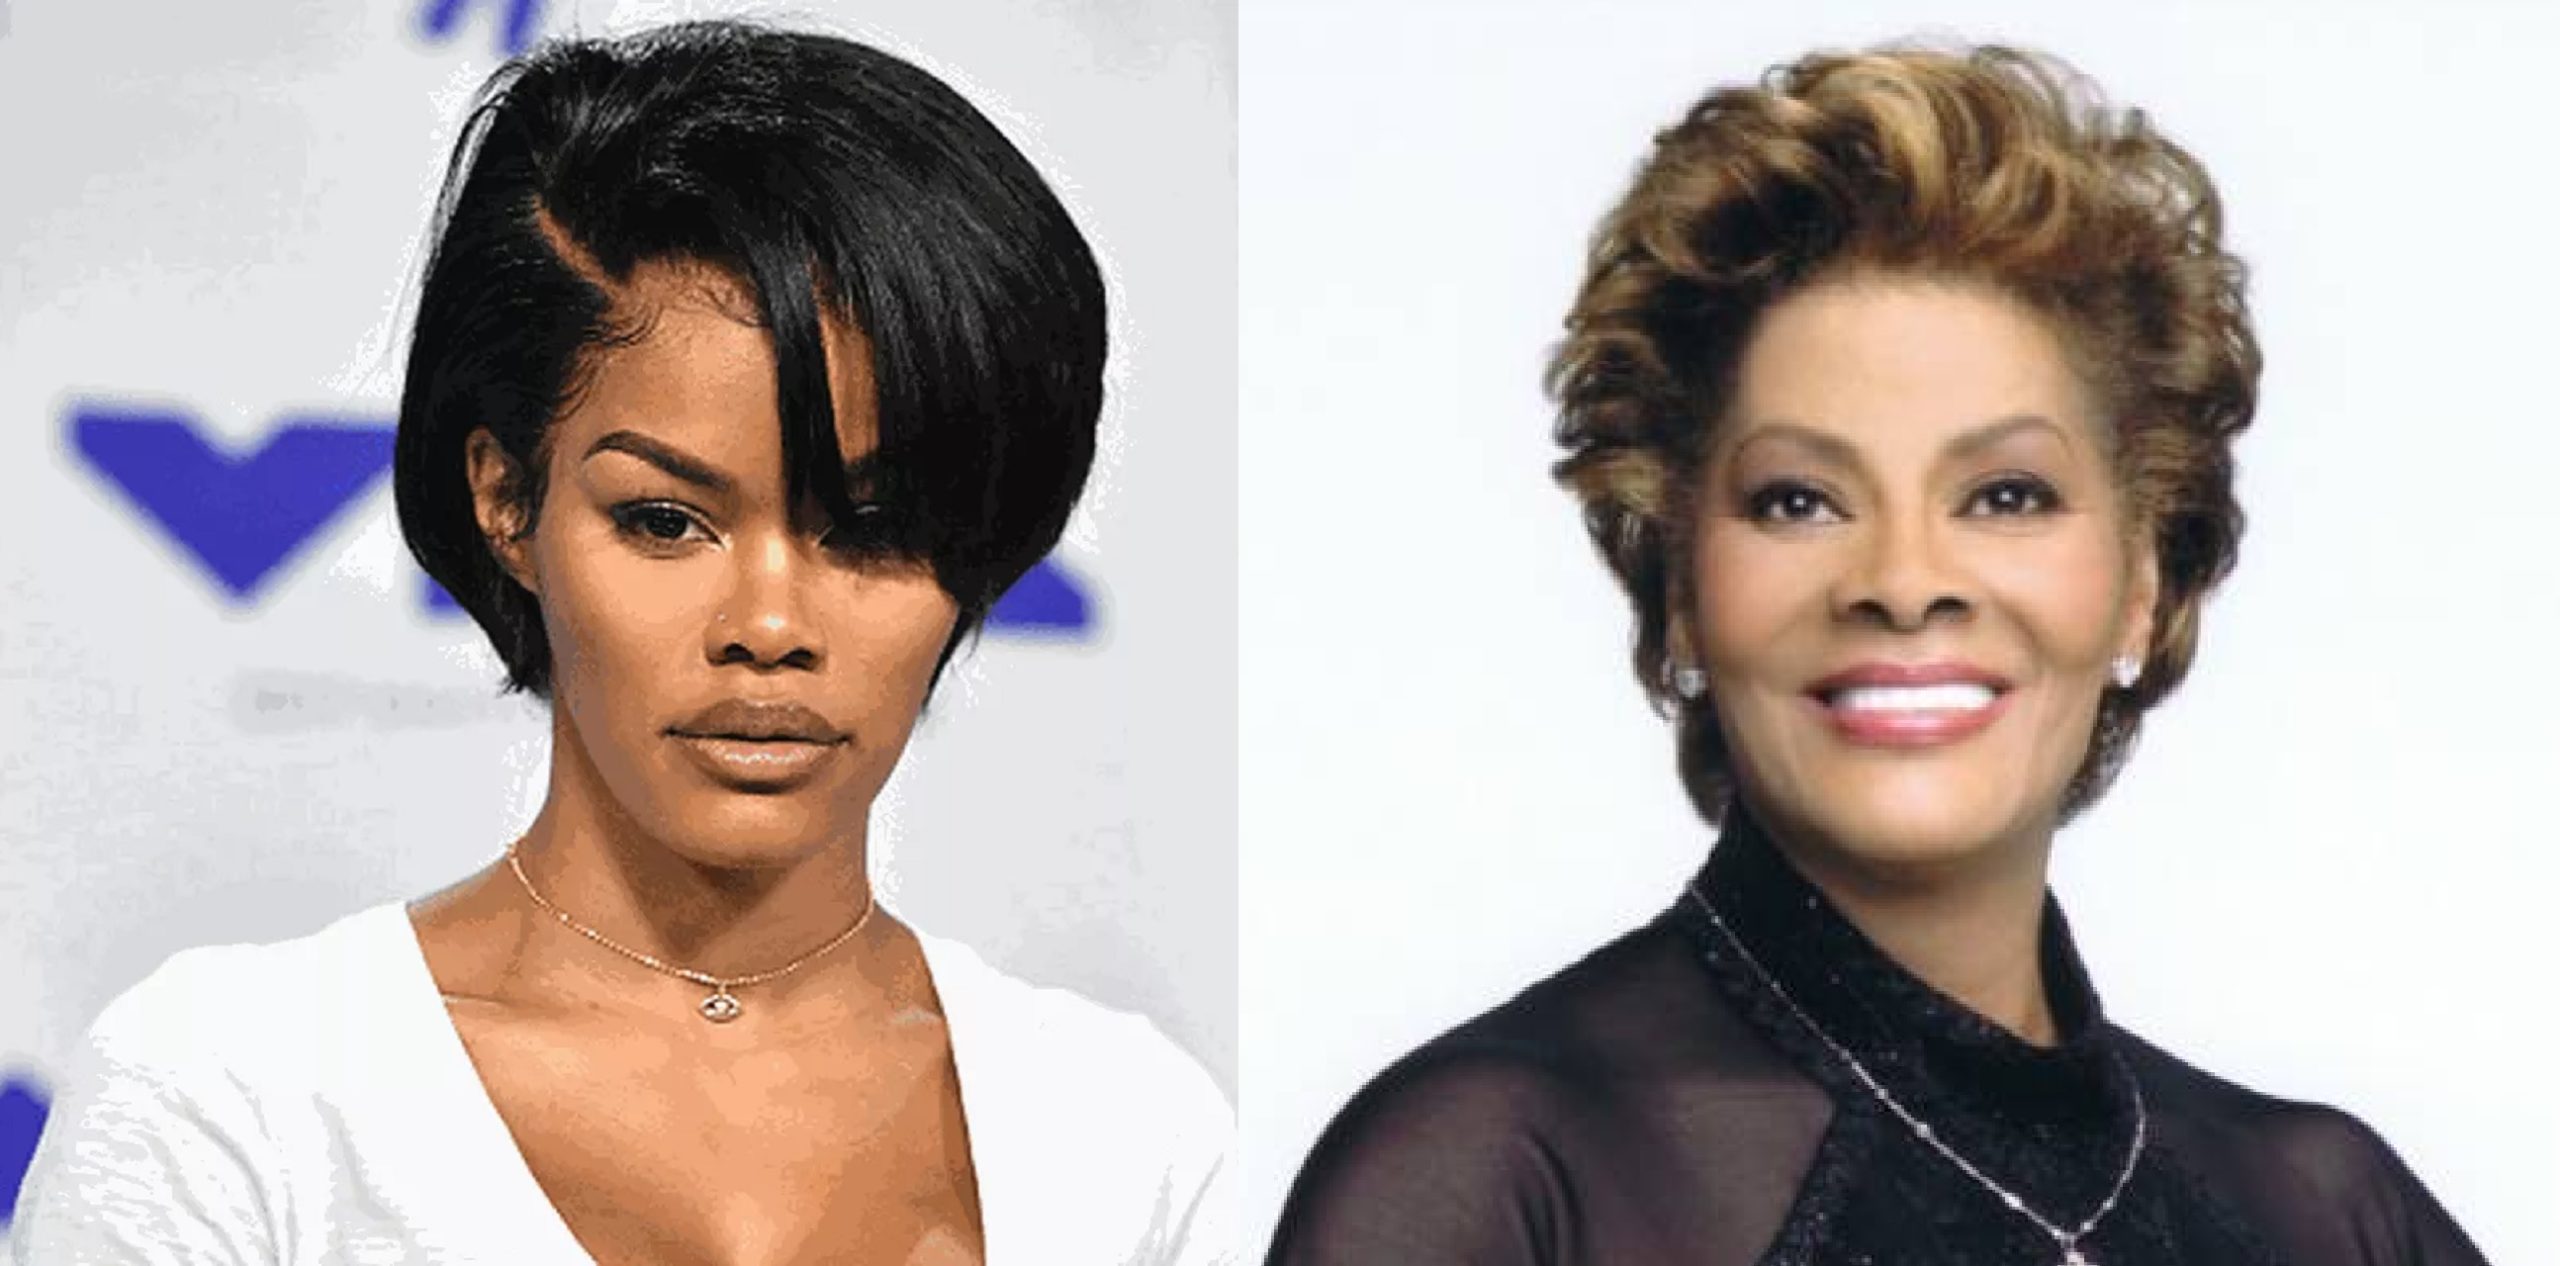 Dionne Warwick Expresses Interest in Teyana Taylor To Play Her in Biopic